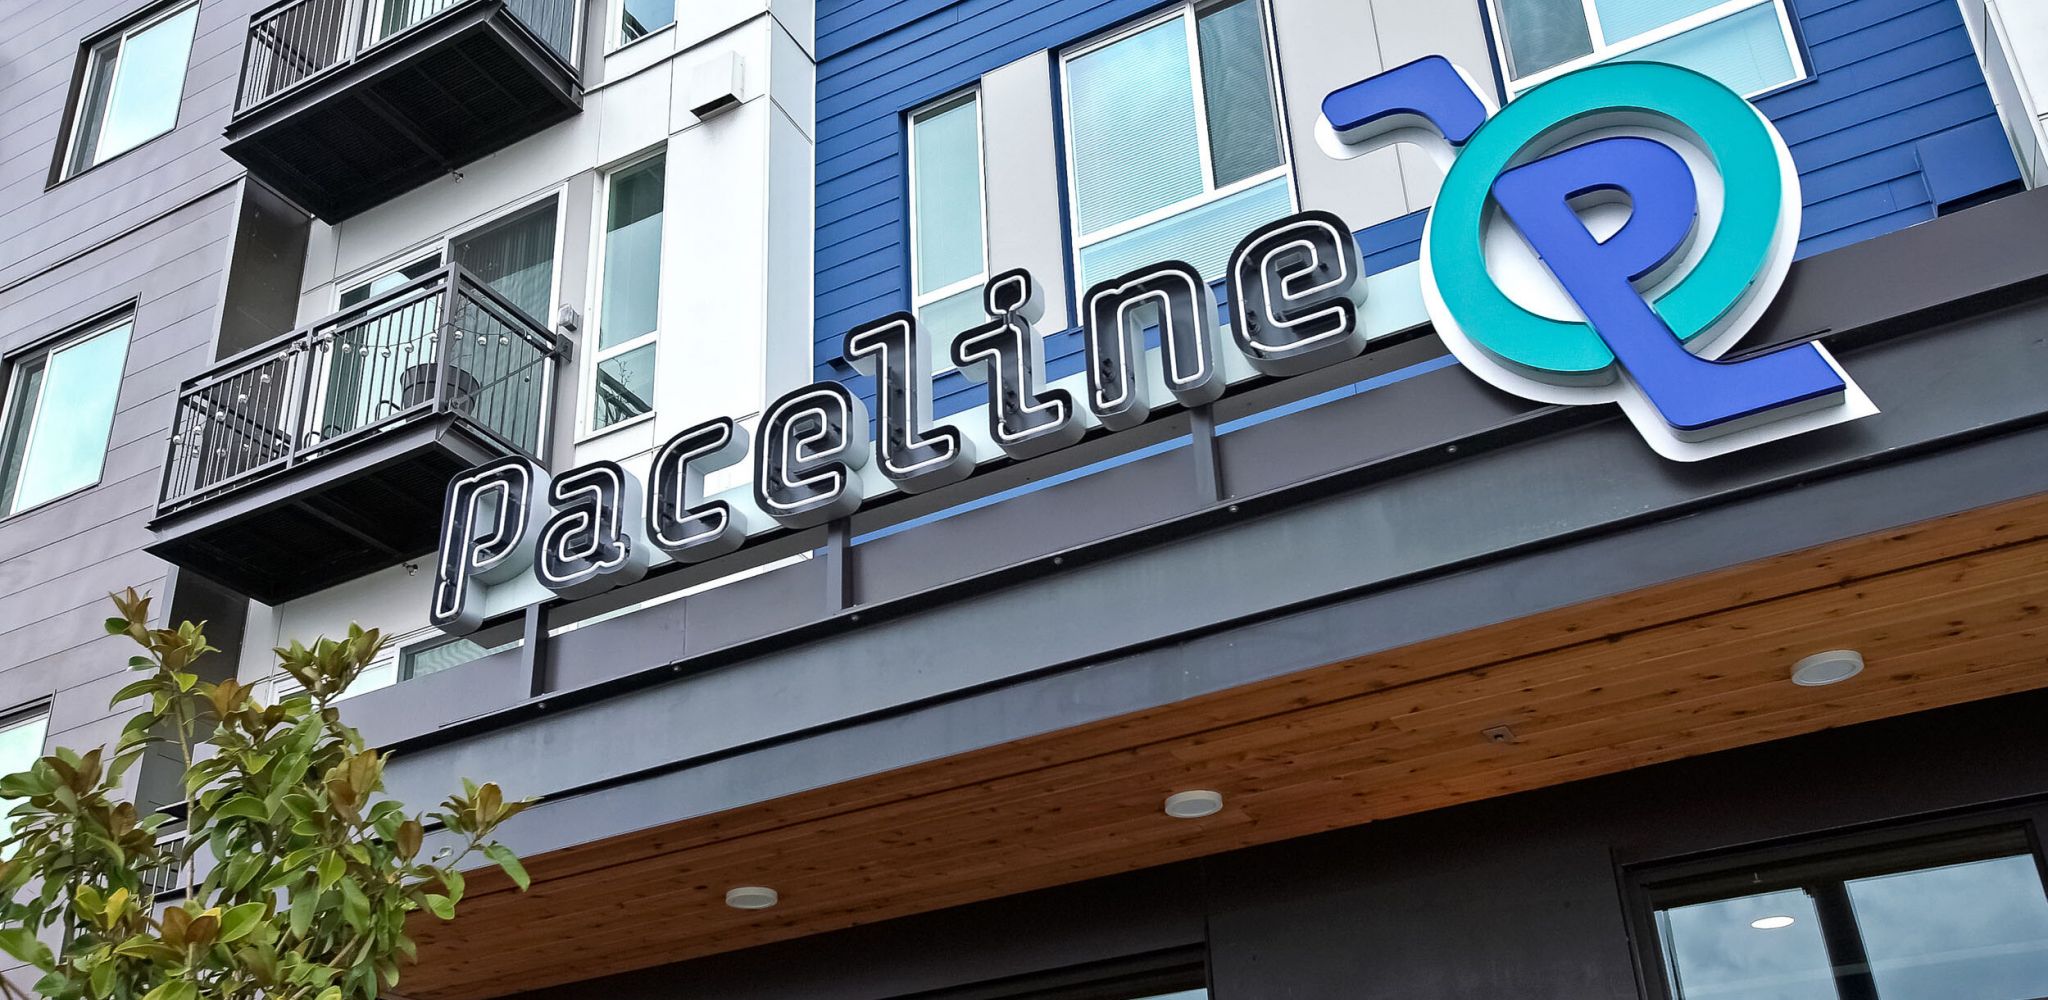 Exterior sign of Paceline apartments